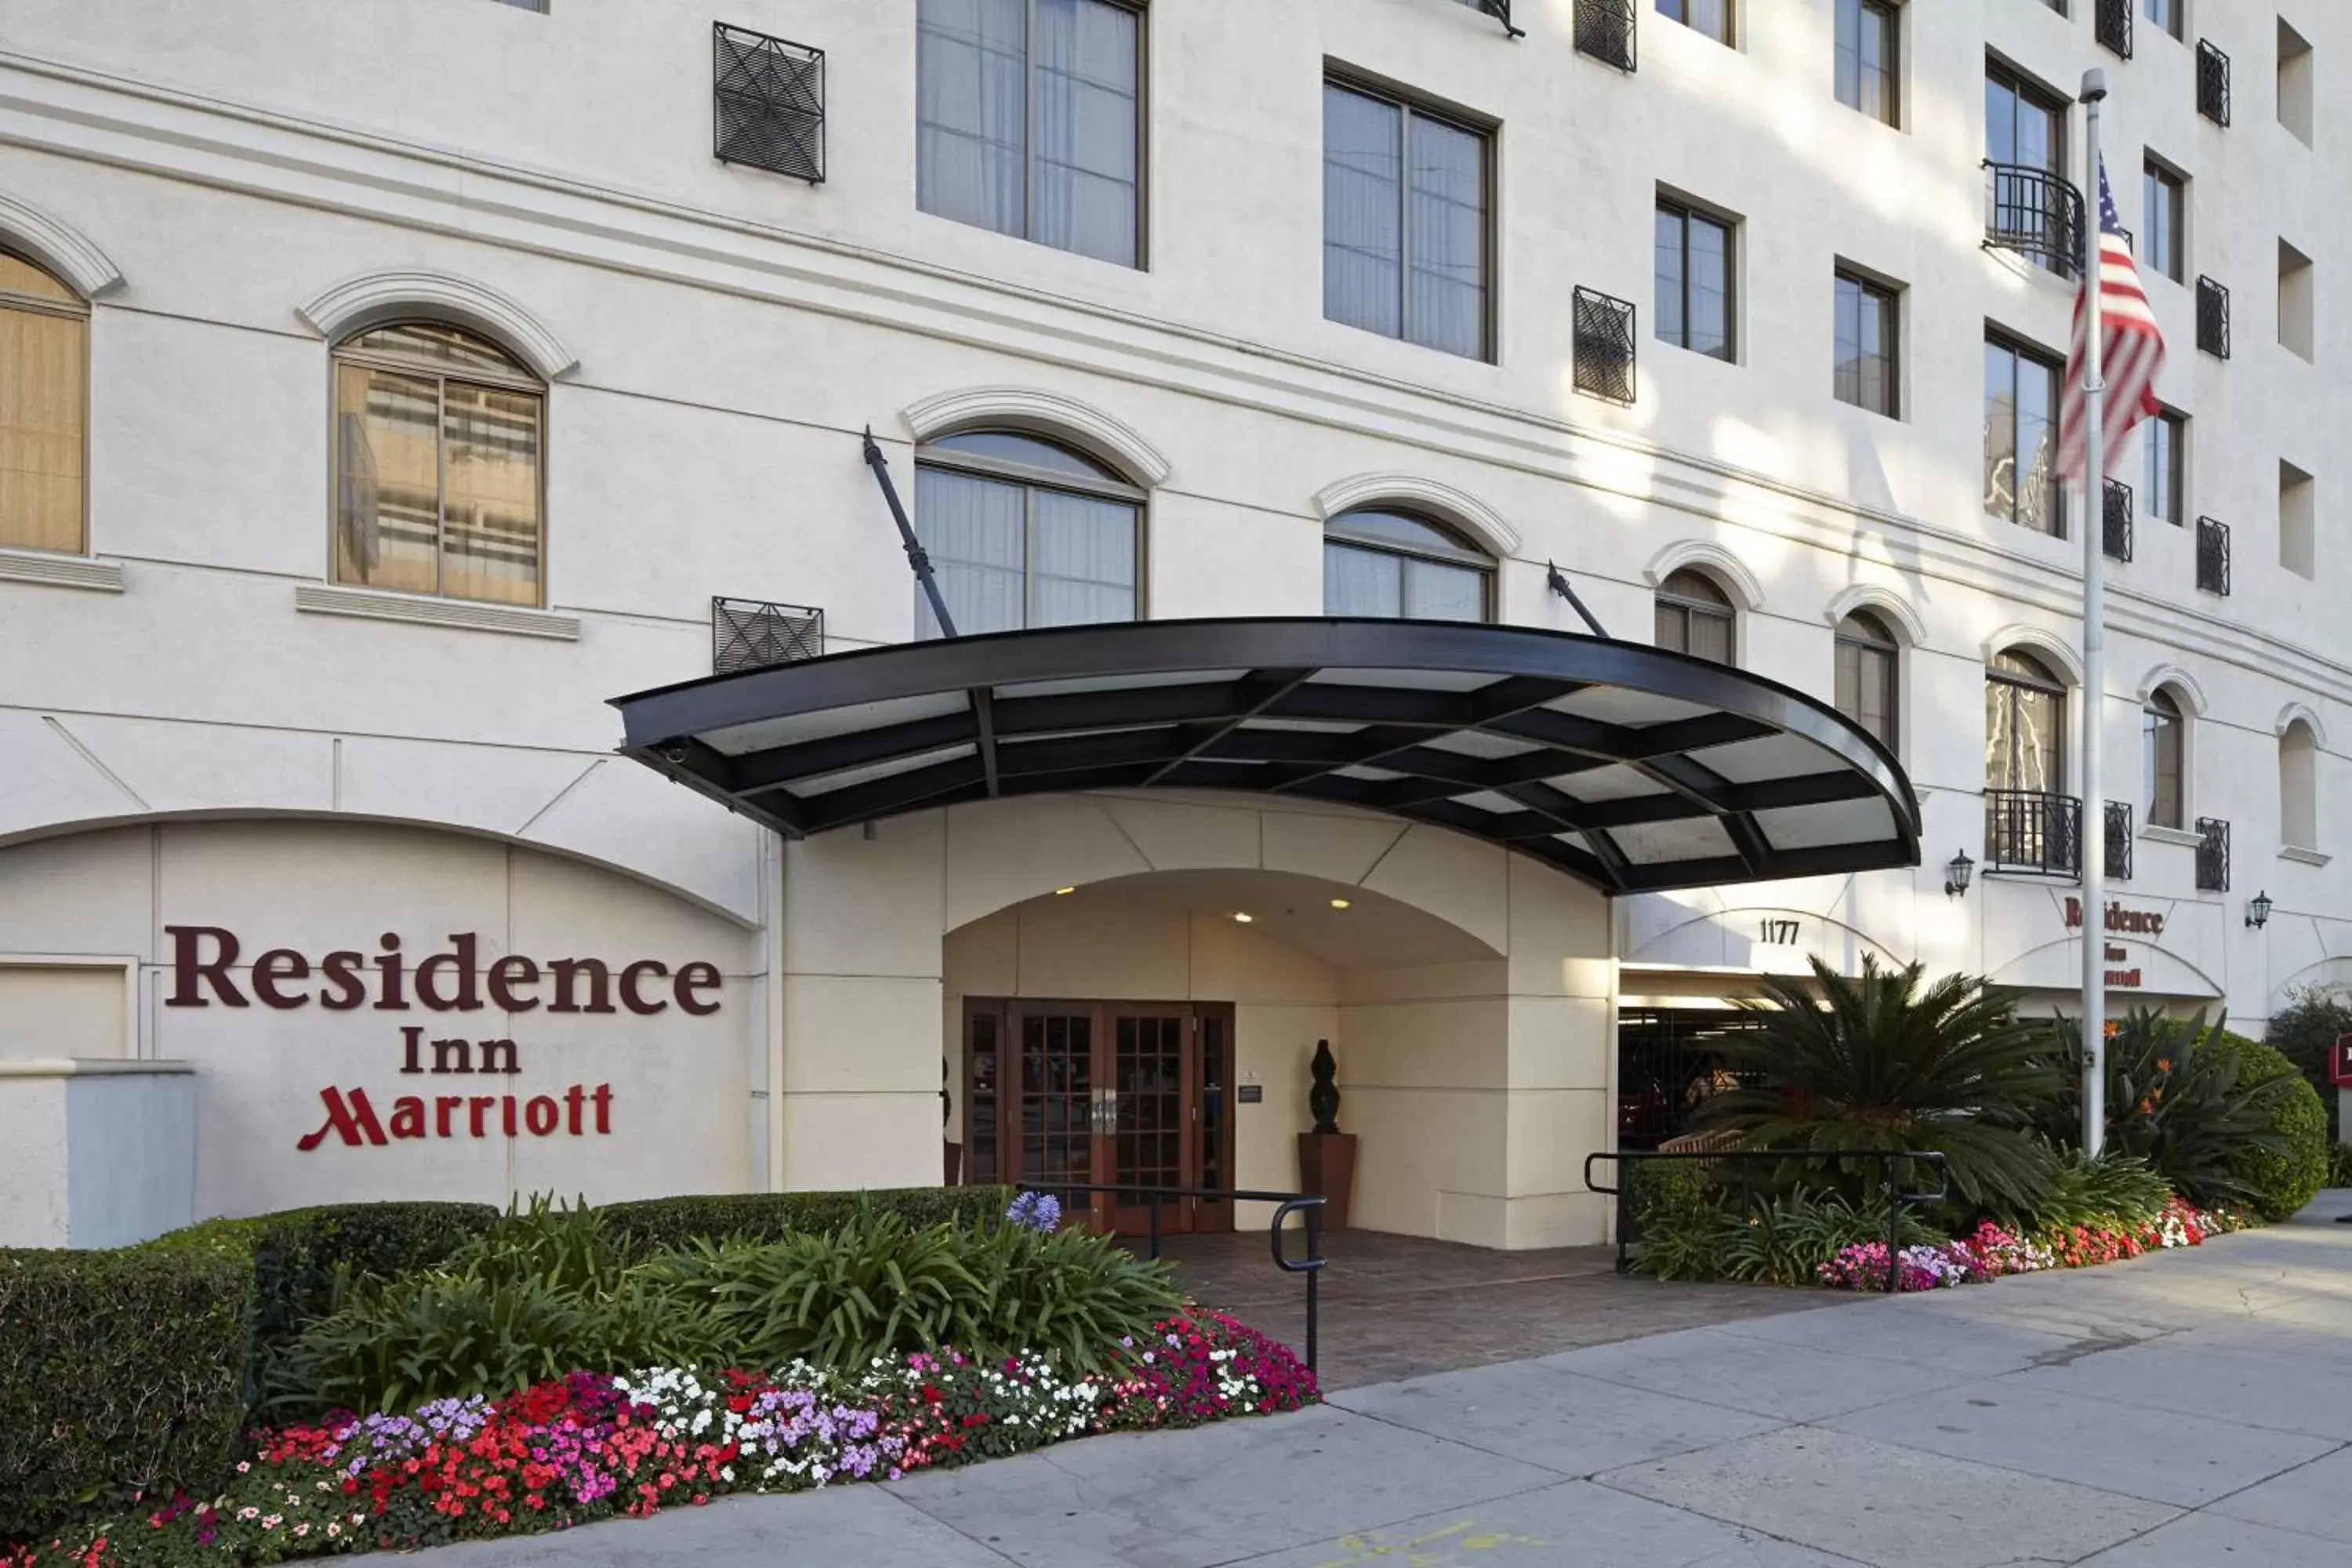 Property Building in Residence Inn by Marriott Beverly Hills